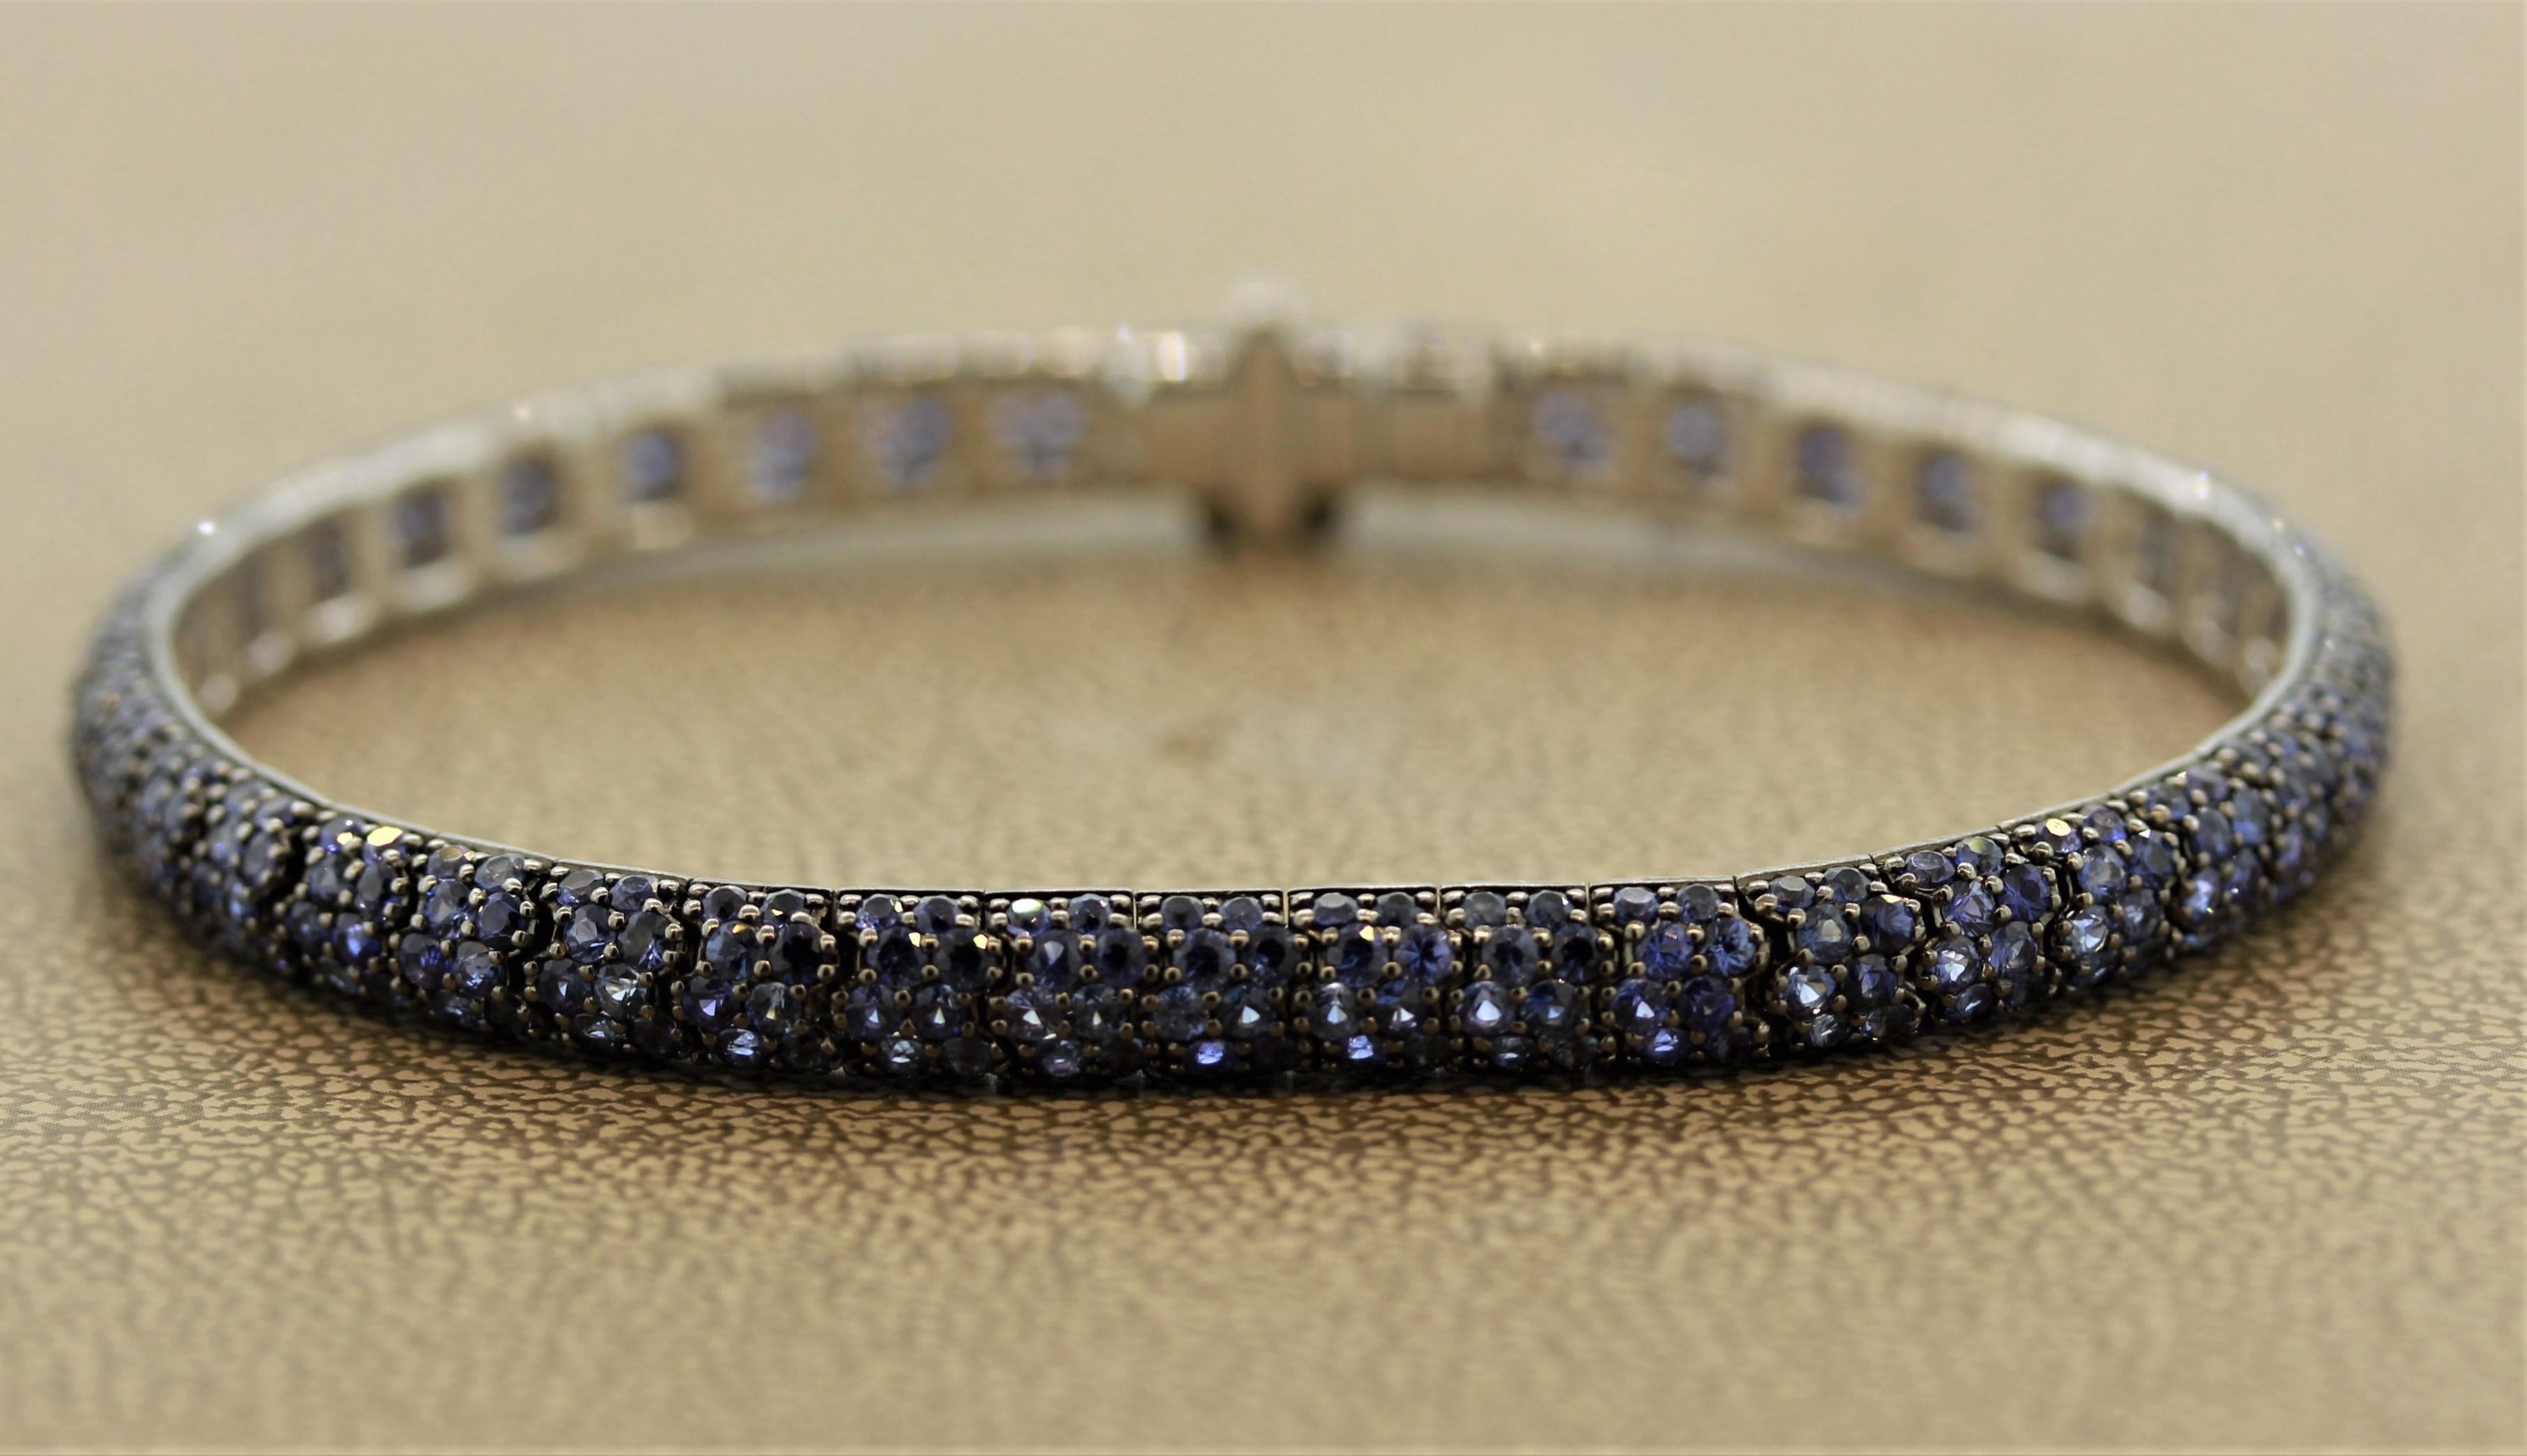 A finely made 18k gold bracelet featuring 14.60 carats of fine blue sapphires. The prongs of sapphires have been rhodium plated to give the piece a black metallic look. The bracelet has a soft flex to it showing its quality.

Length: 7 inches